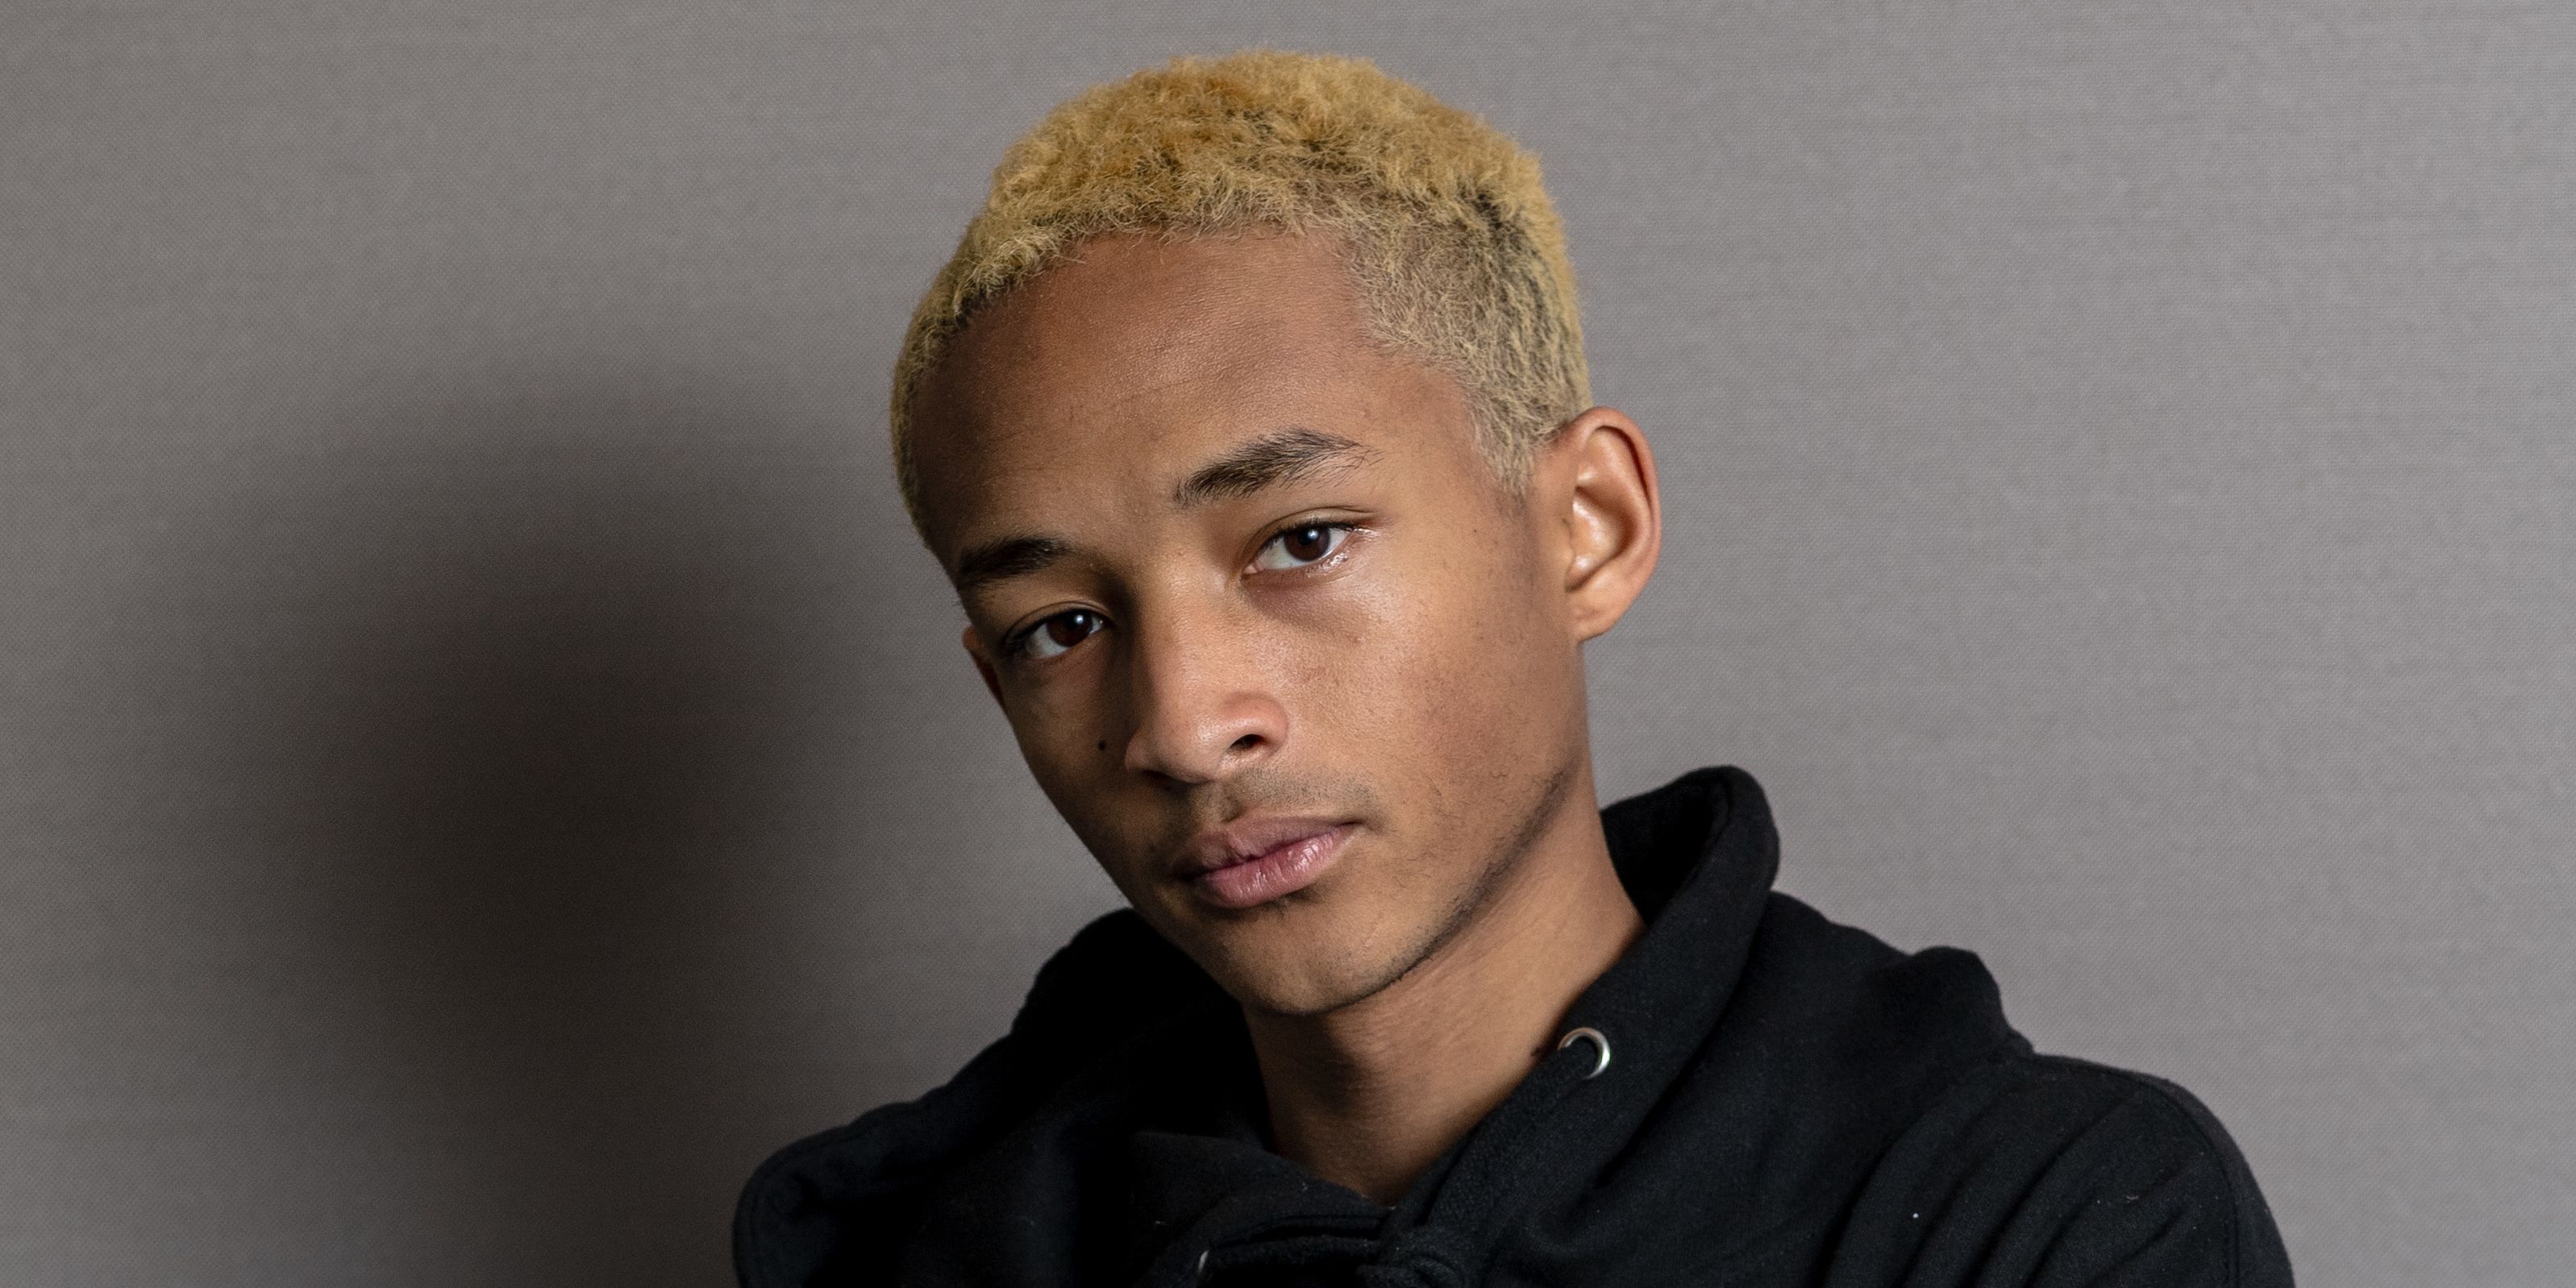 5 minutes with Jaden Smith: meet the movie star offspring with plans to save the planet